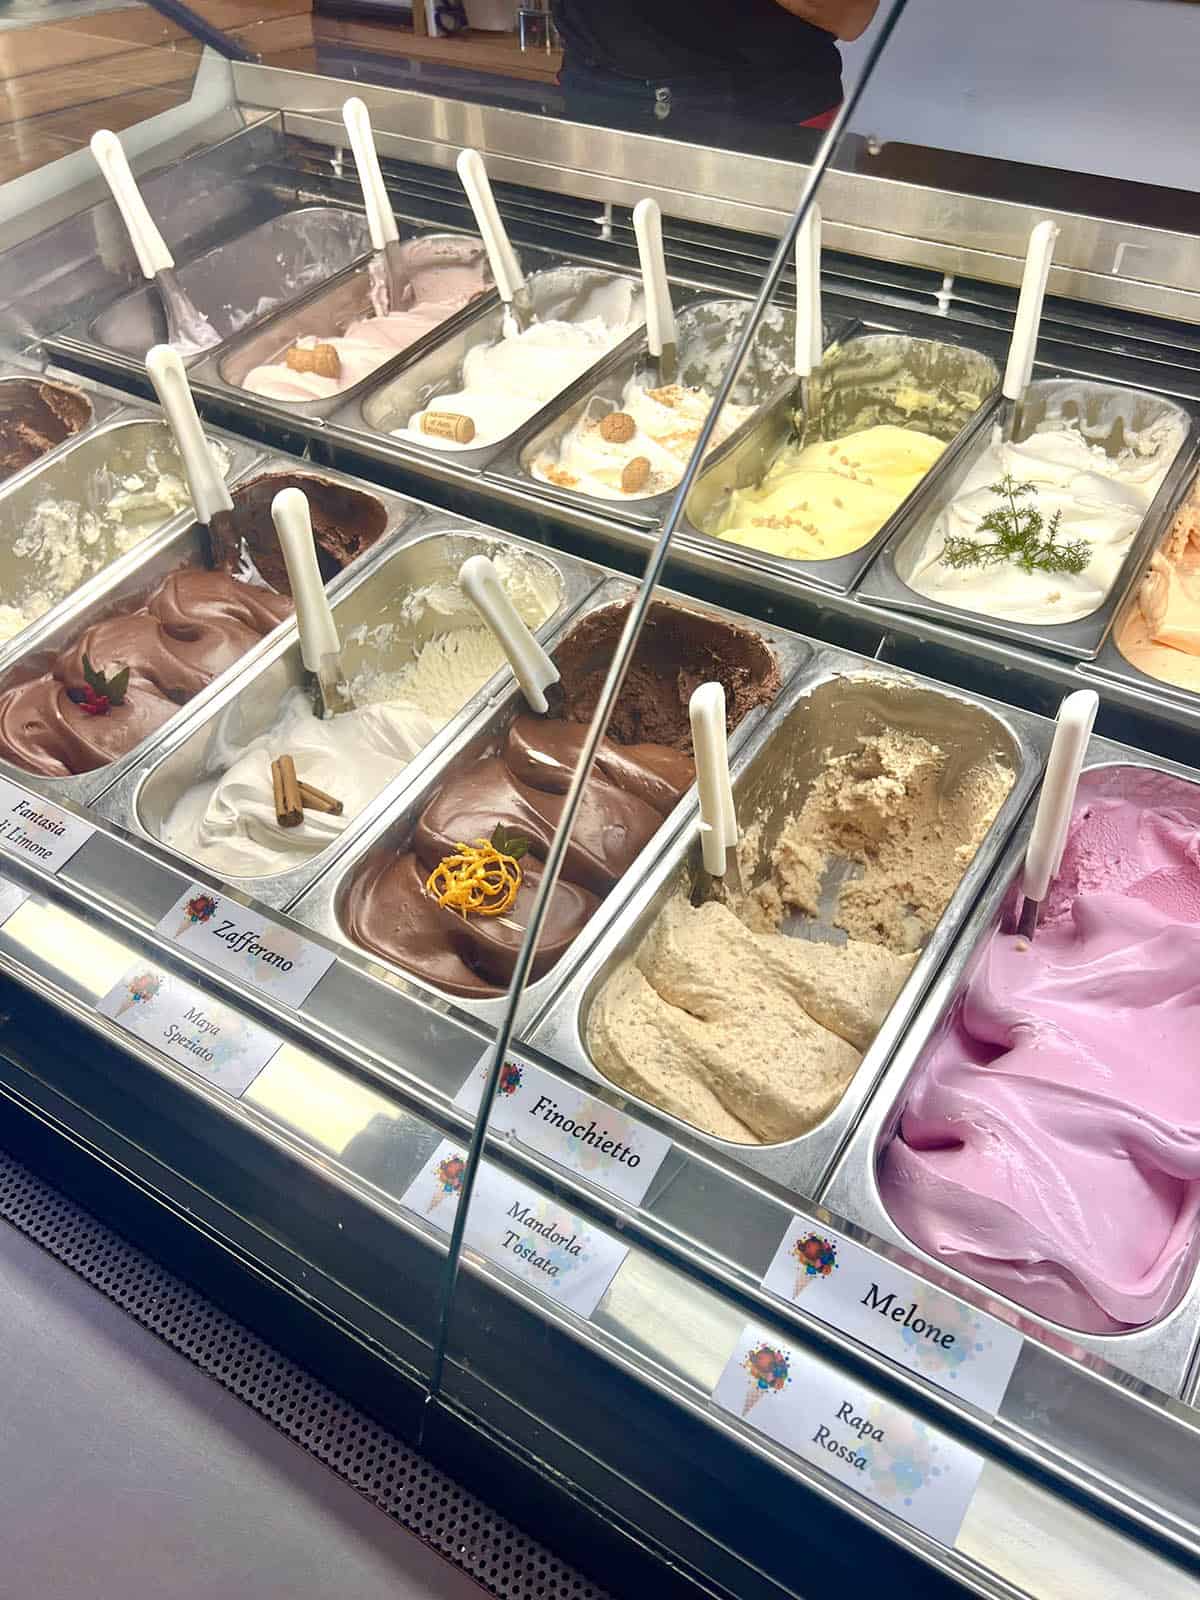 An image of the ice creams available at Gelati Divini in Ragusa Ibla, Sicily